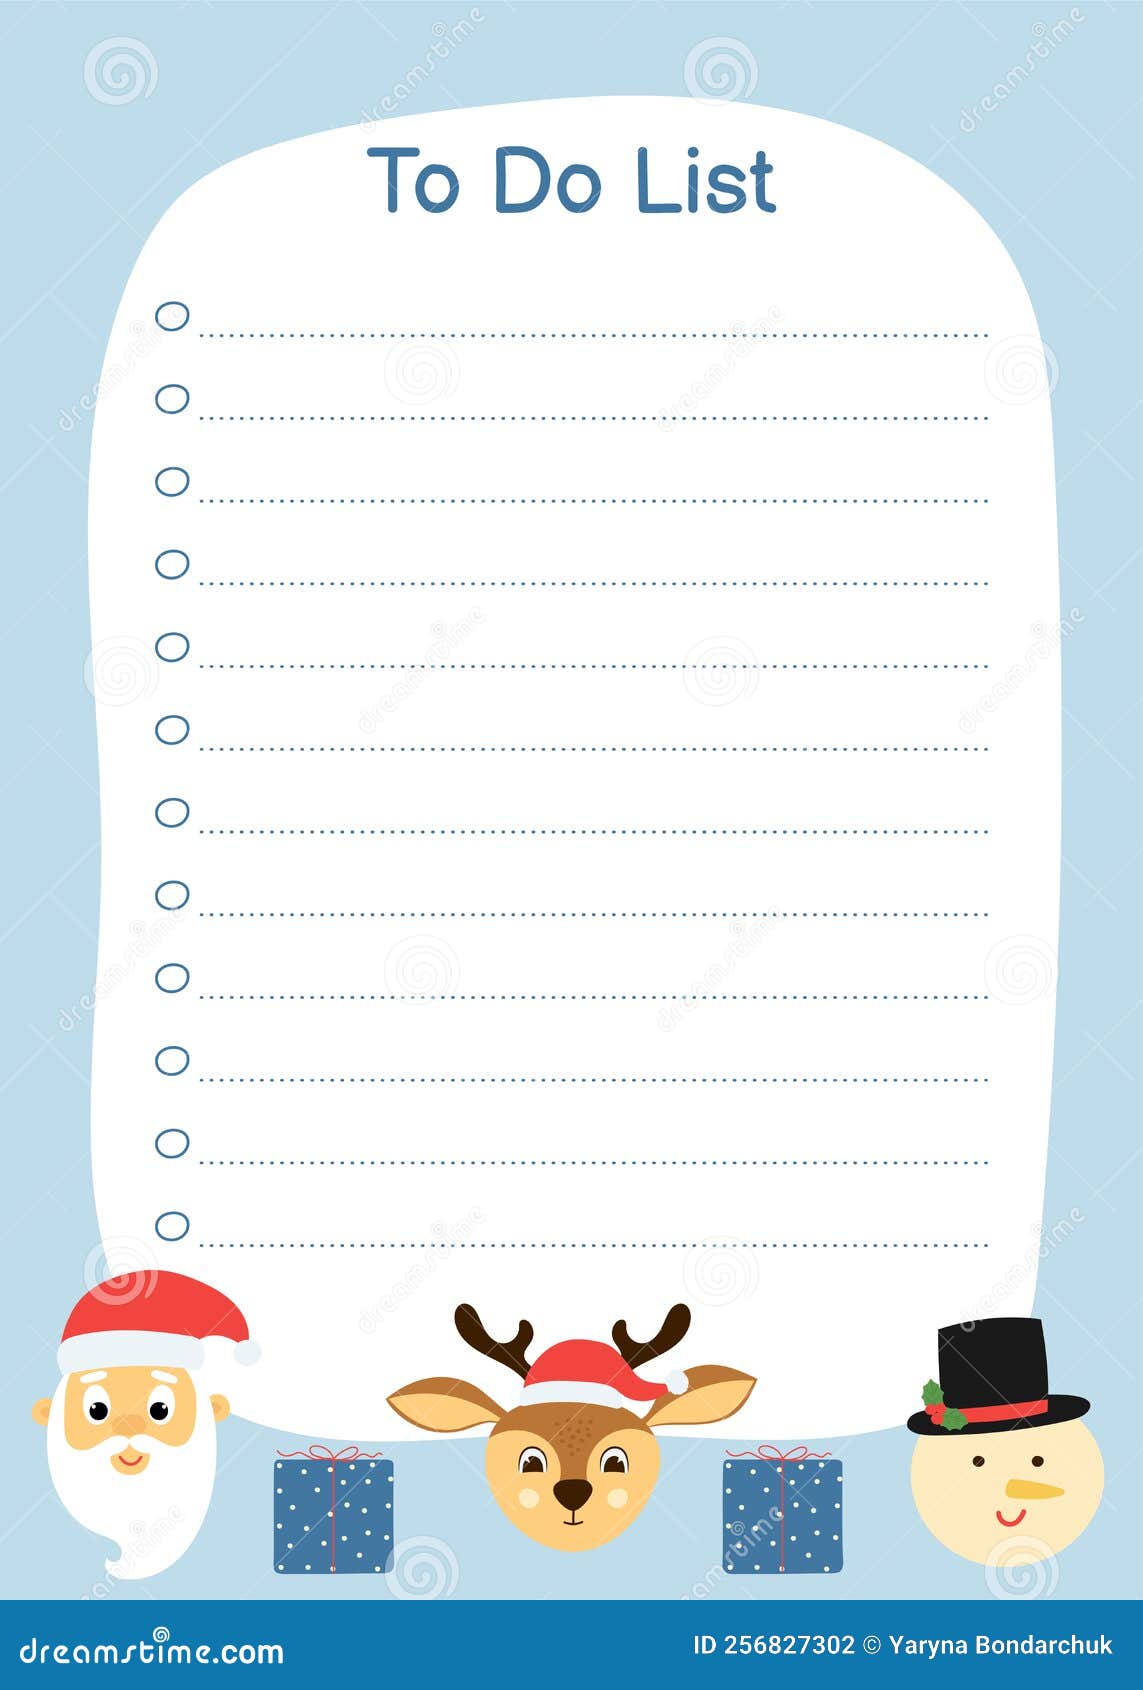 template-for-to-do-list-with-cute-winter-characters-and-gift-boxes